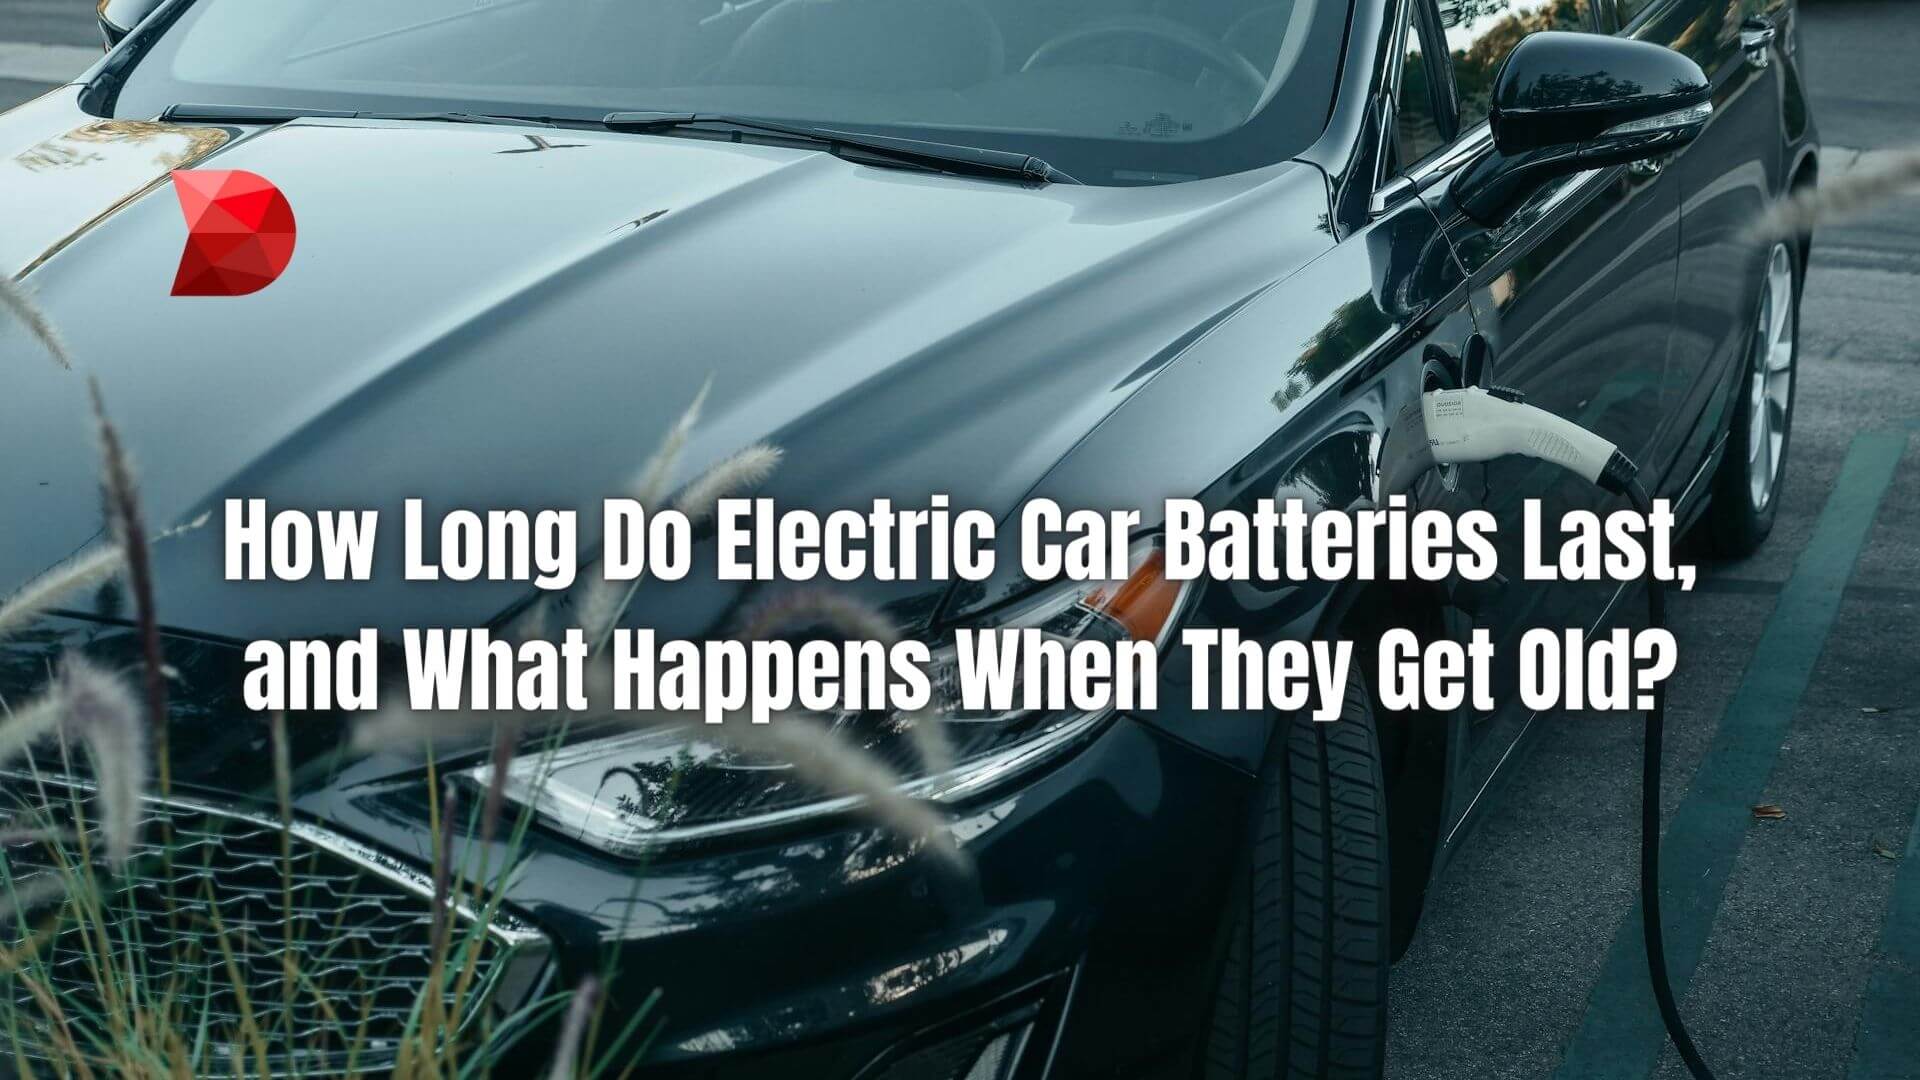 Uncover the secrets of electric car batteries! Click here to learn more about the lifespan of electric car batteries and their aging process.